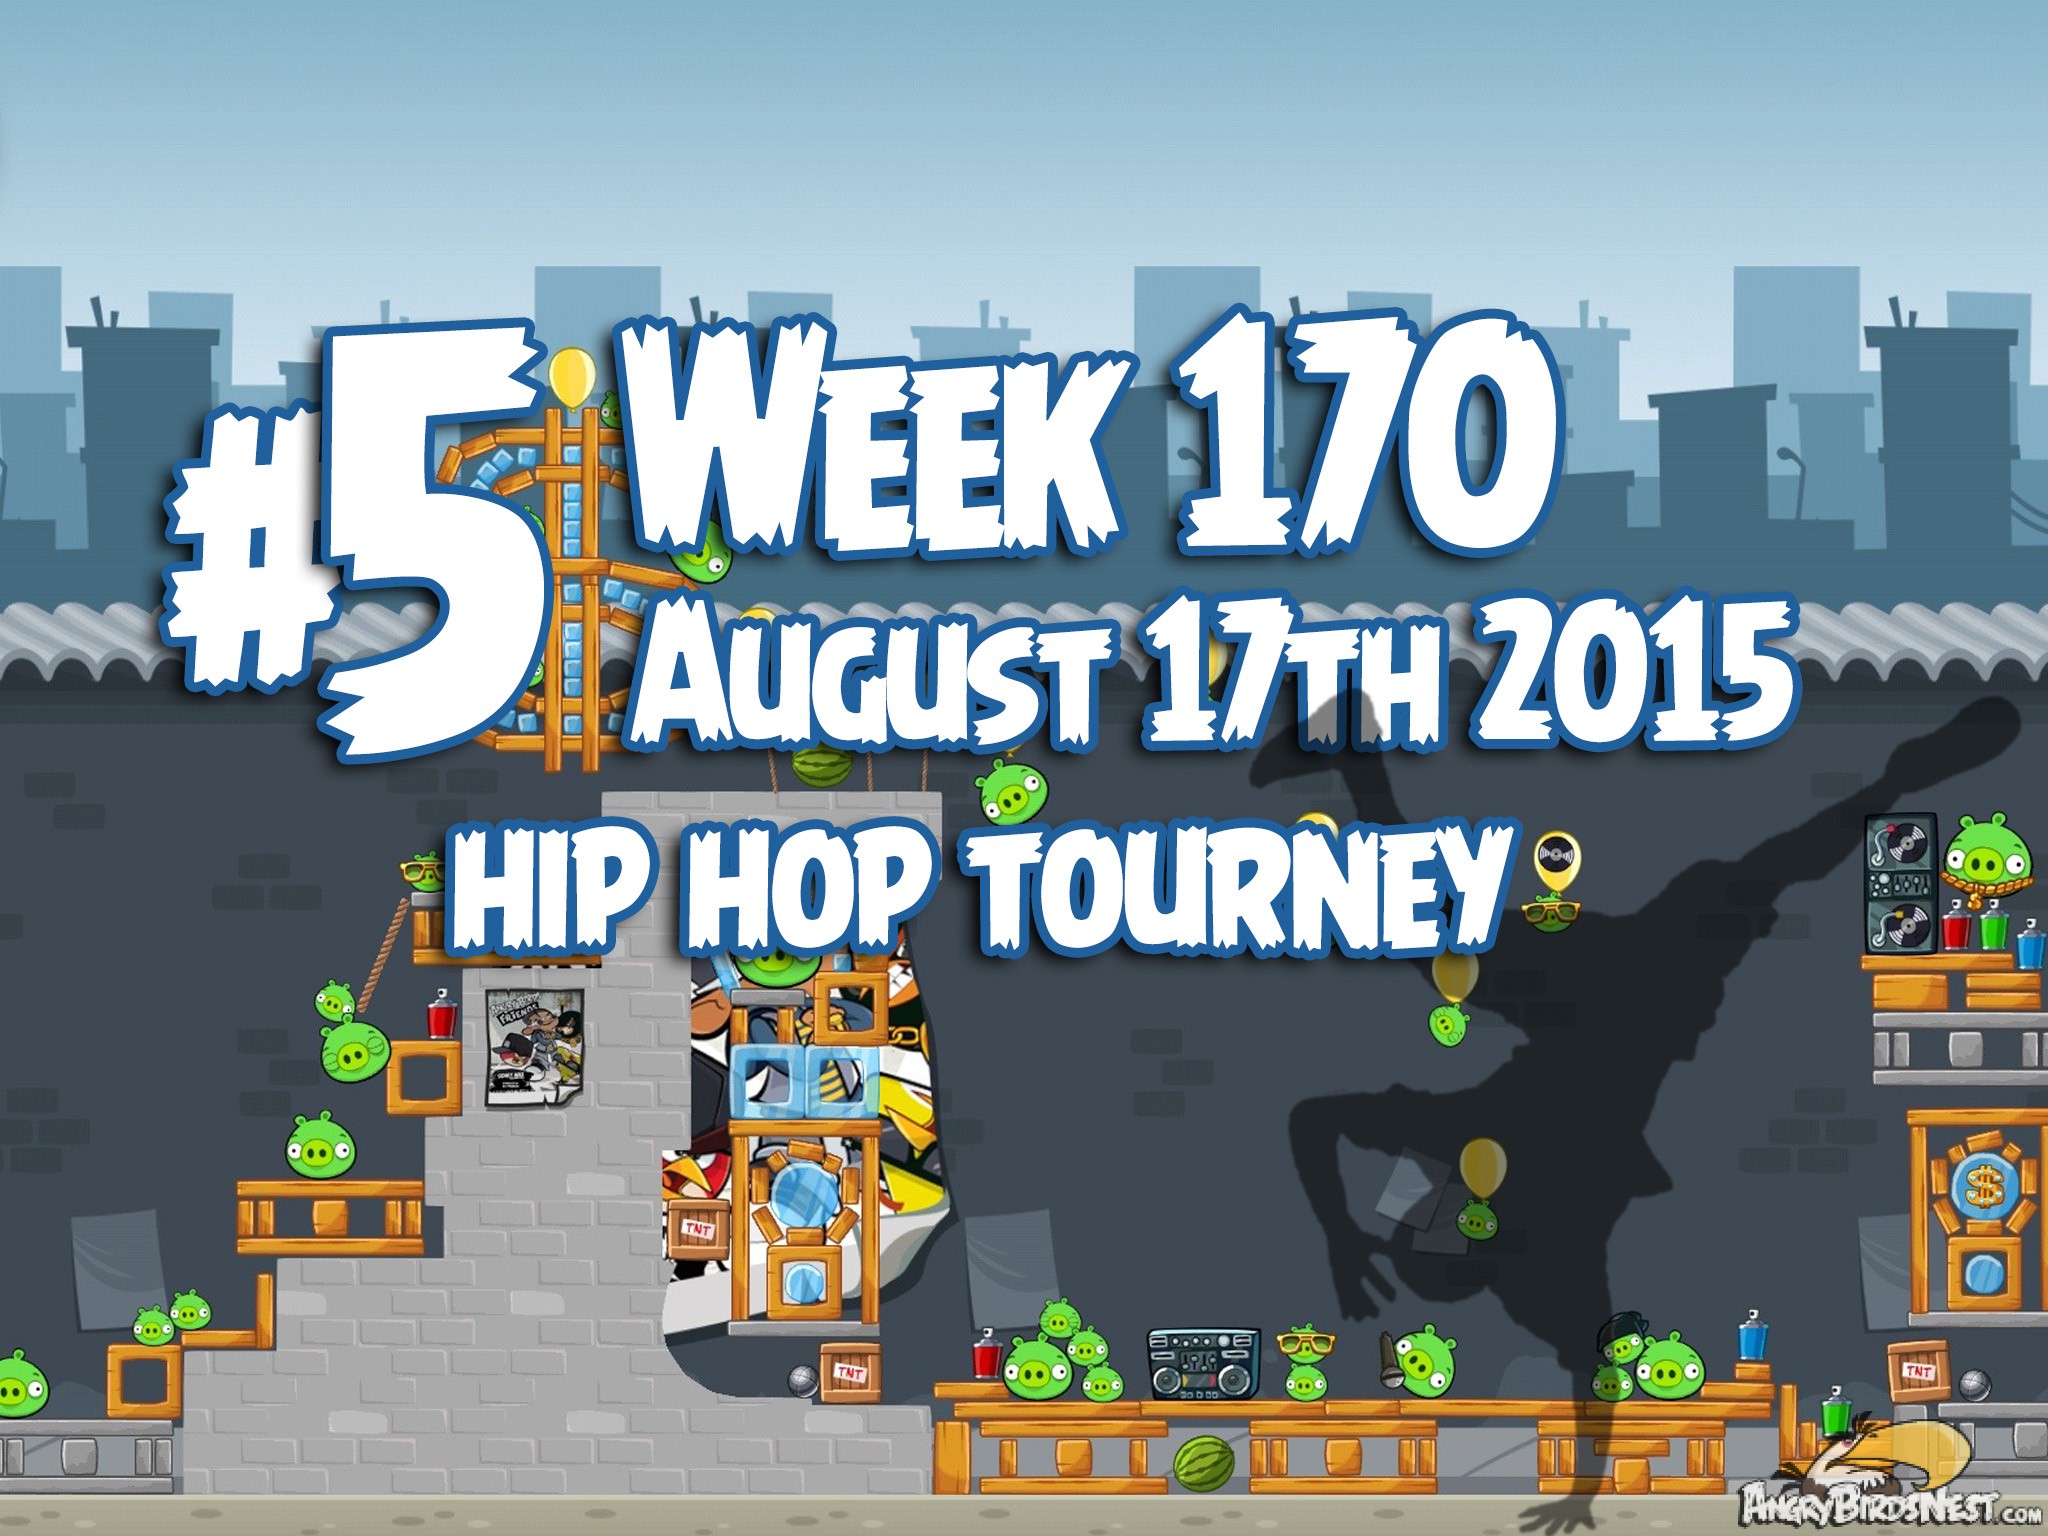 Angry Birds Friends Tournament Week 170 Level 5